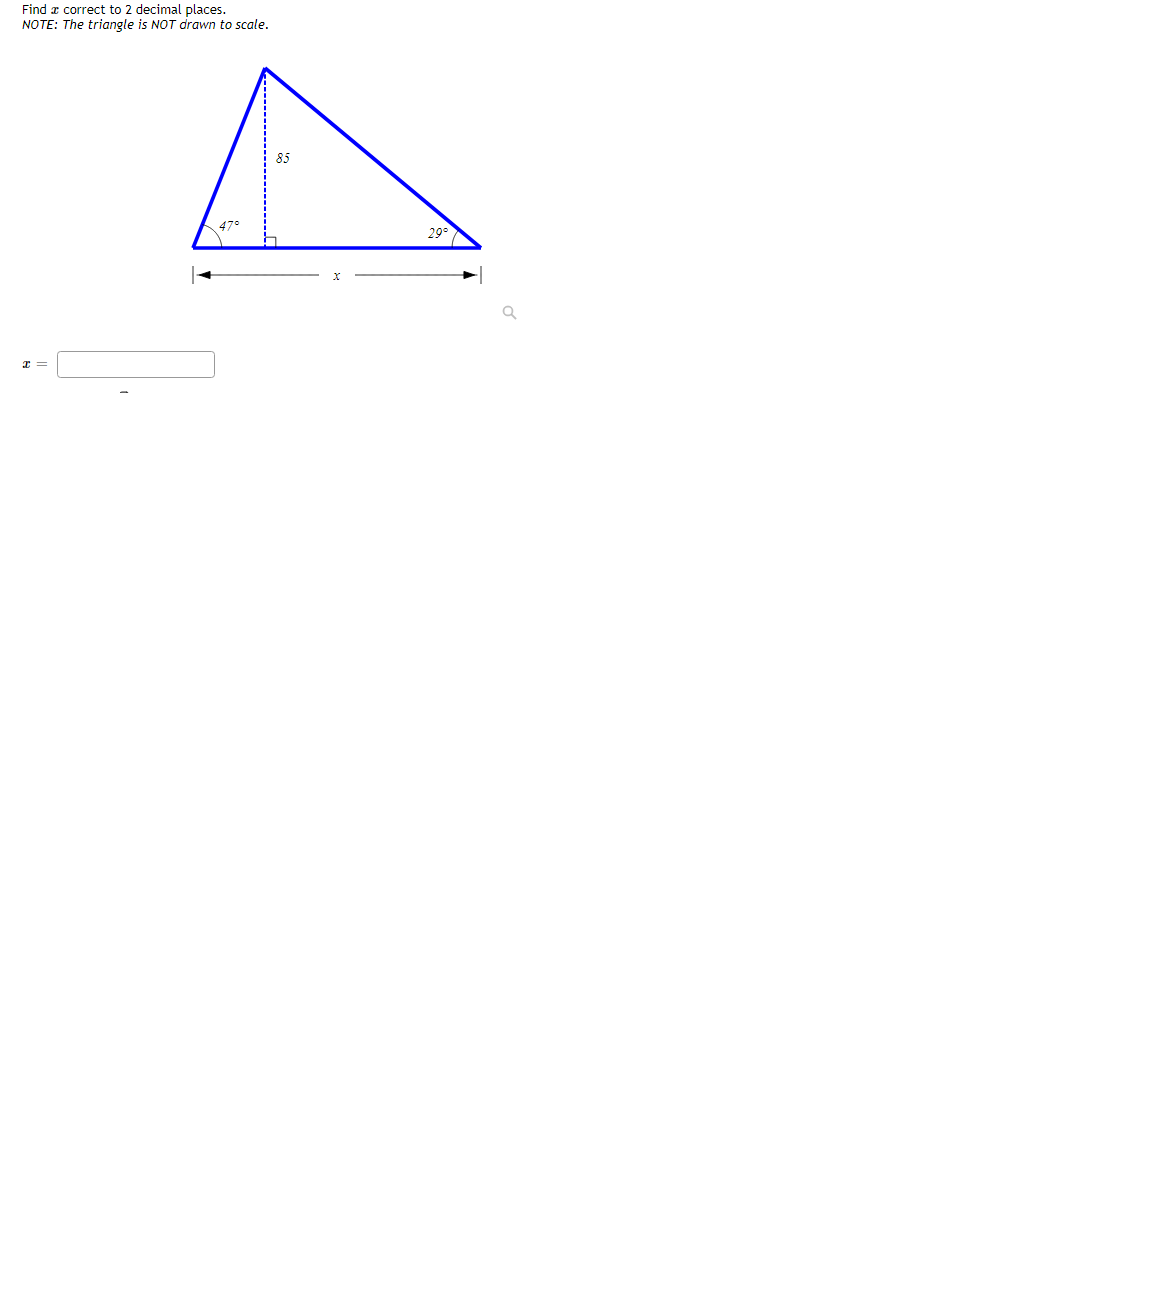 Find z correct to 2 decimal places.
NOTE: The triangle is NOT drawn to scale.
85
47°
29°
